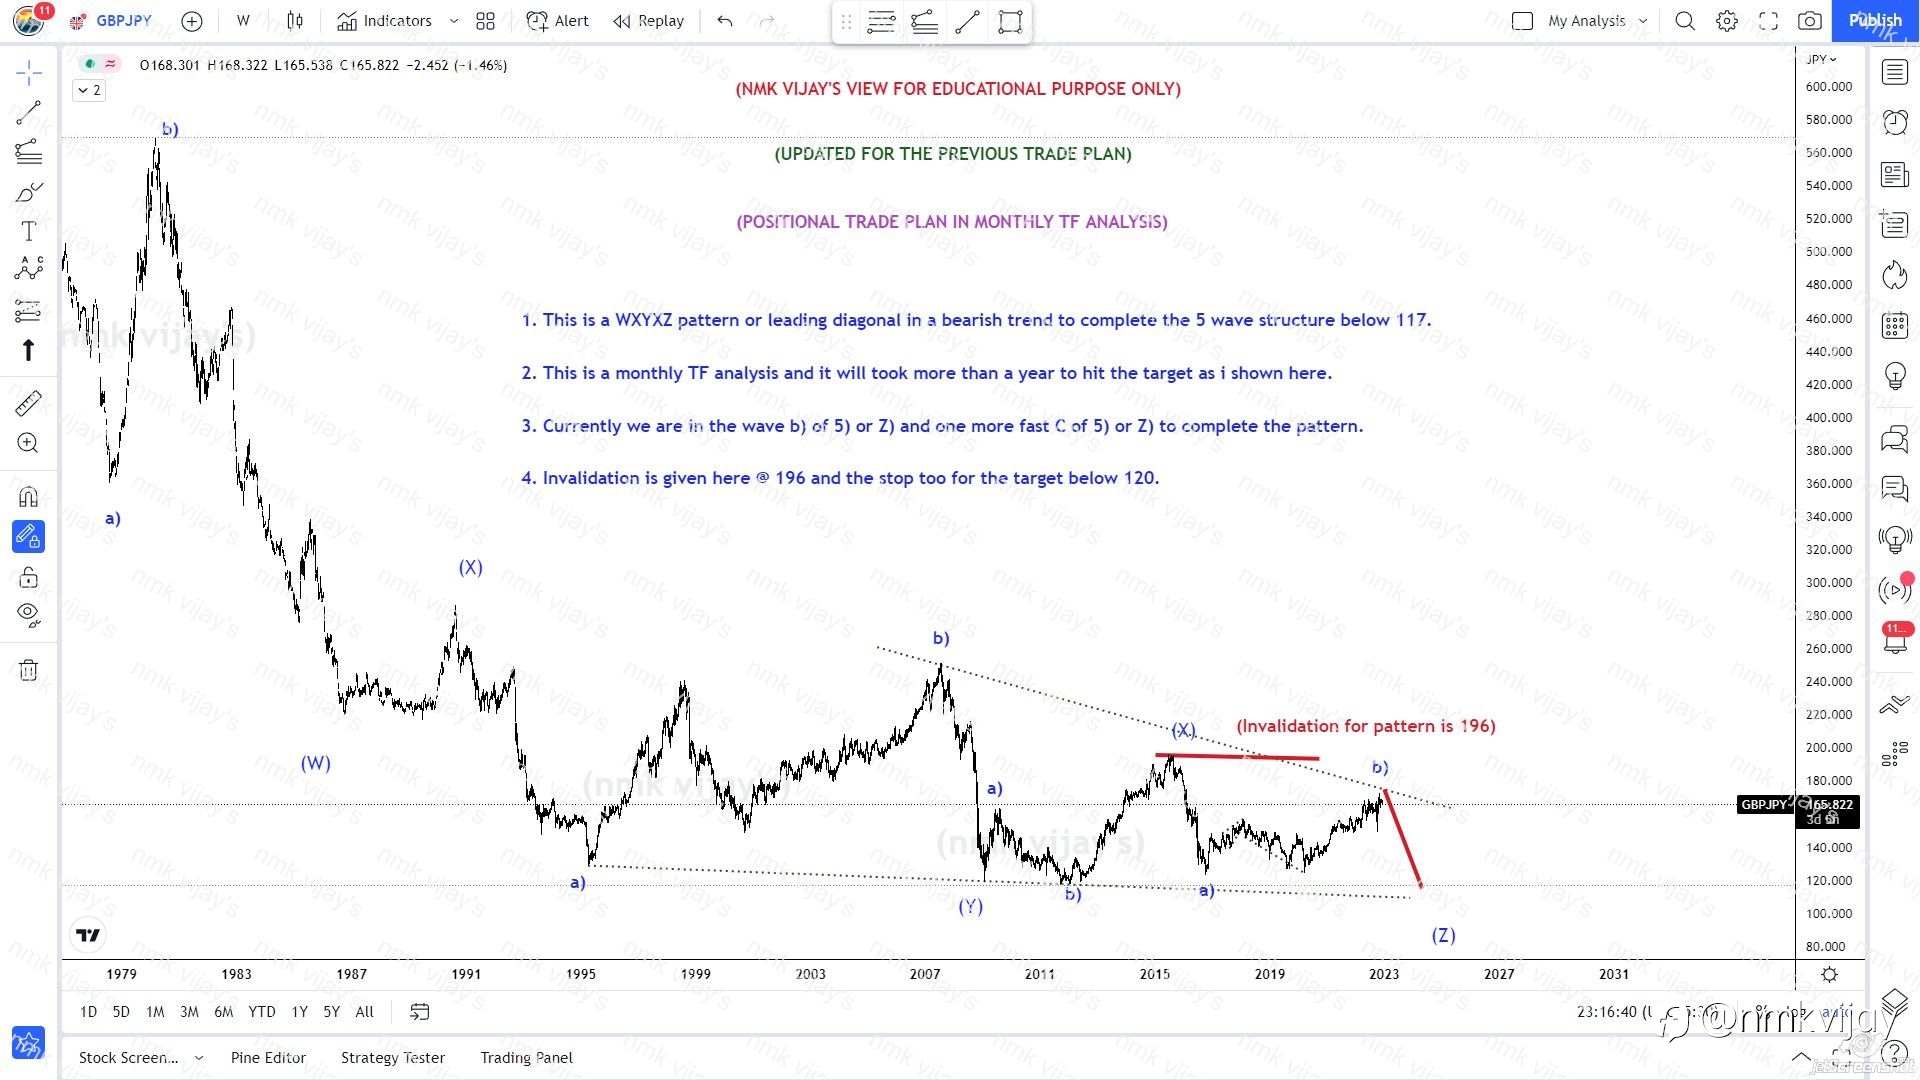 GBPJPY: Positional target to hit below 117 for wave 5) or Z0 to complete the pattern